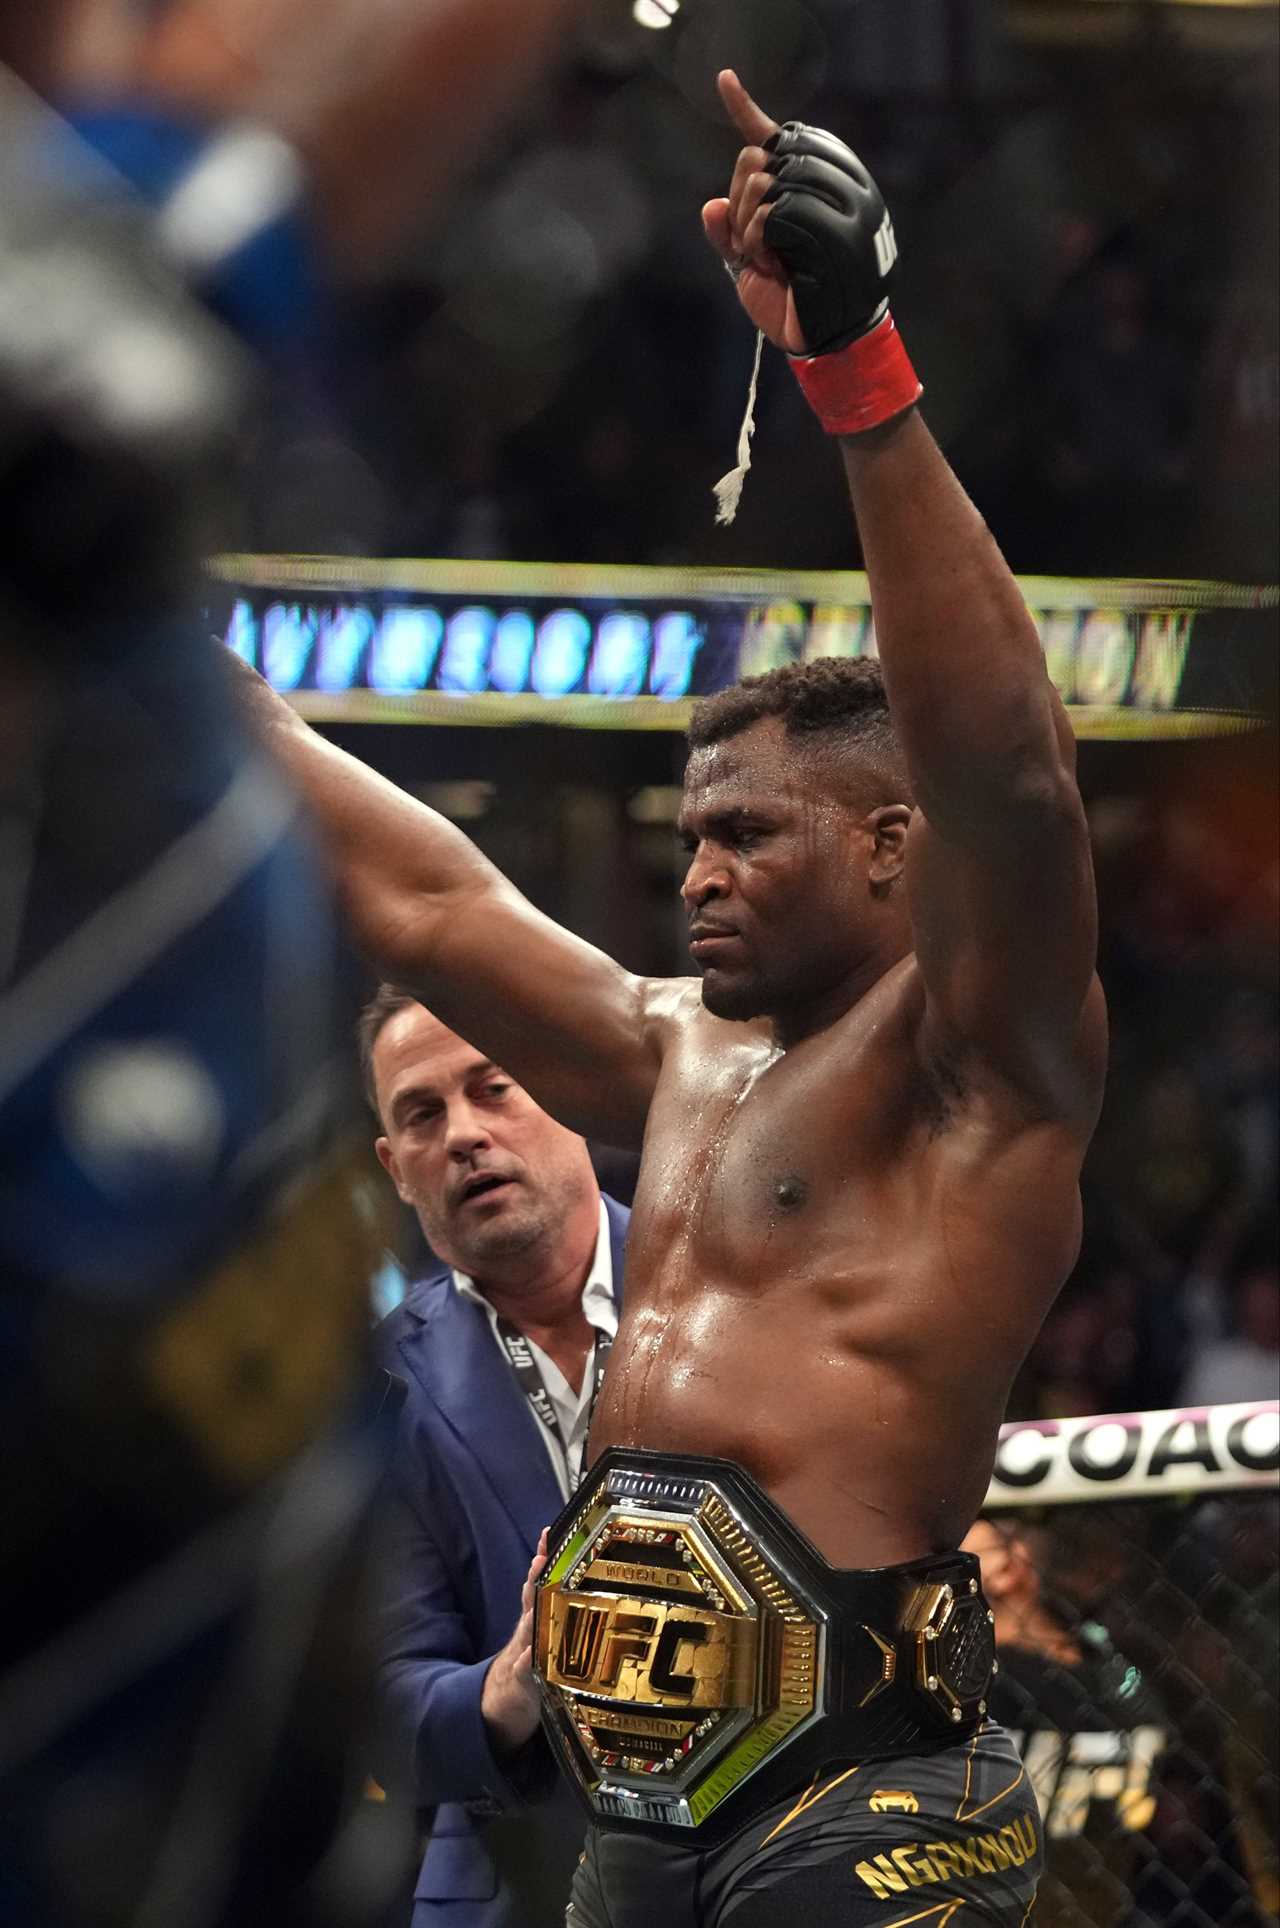 Francis Ngannou reveals that Tyson Fury talk is overblown and that he could make a stunning UFC return in December, after undergoing surgery